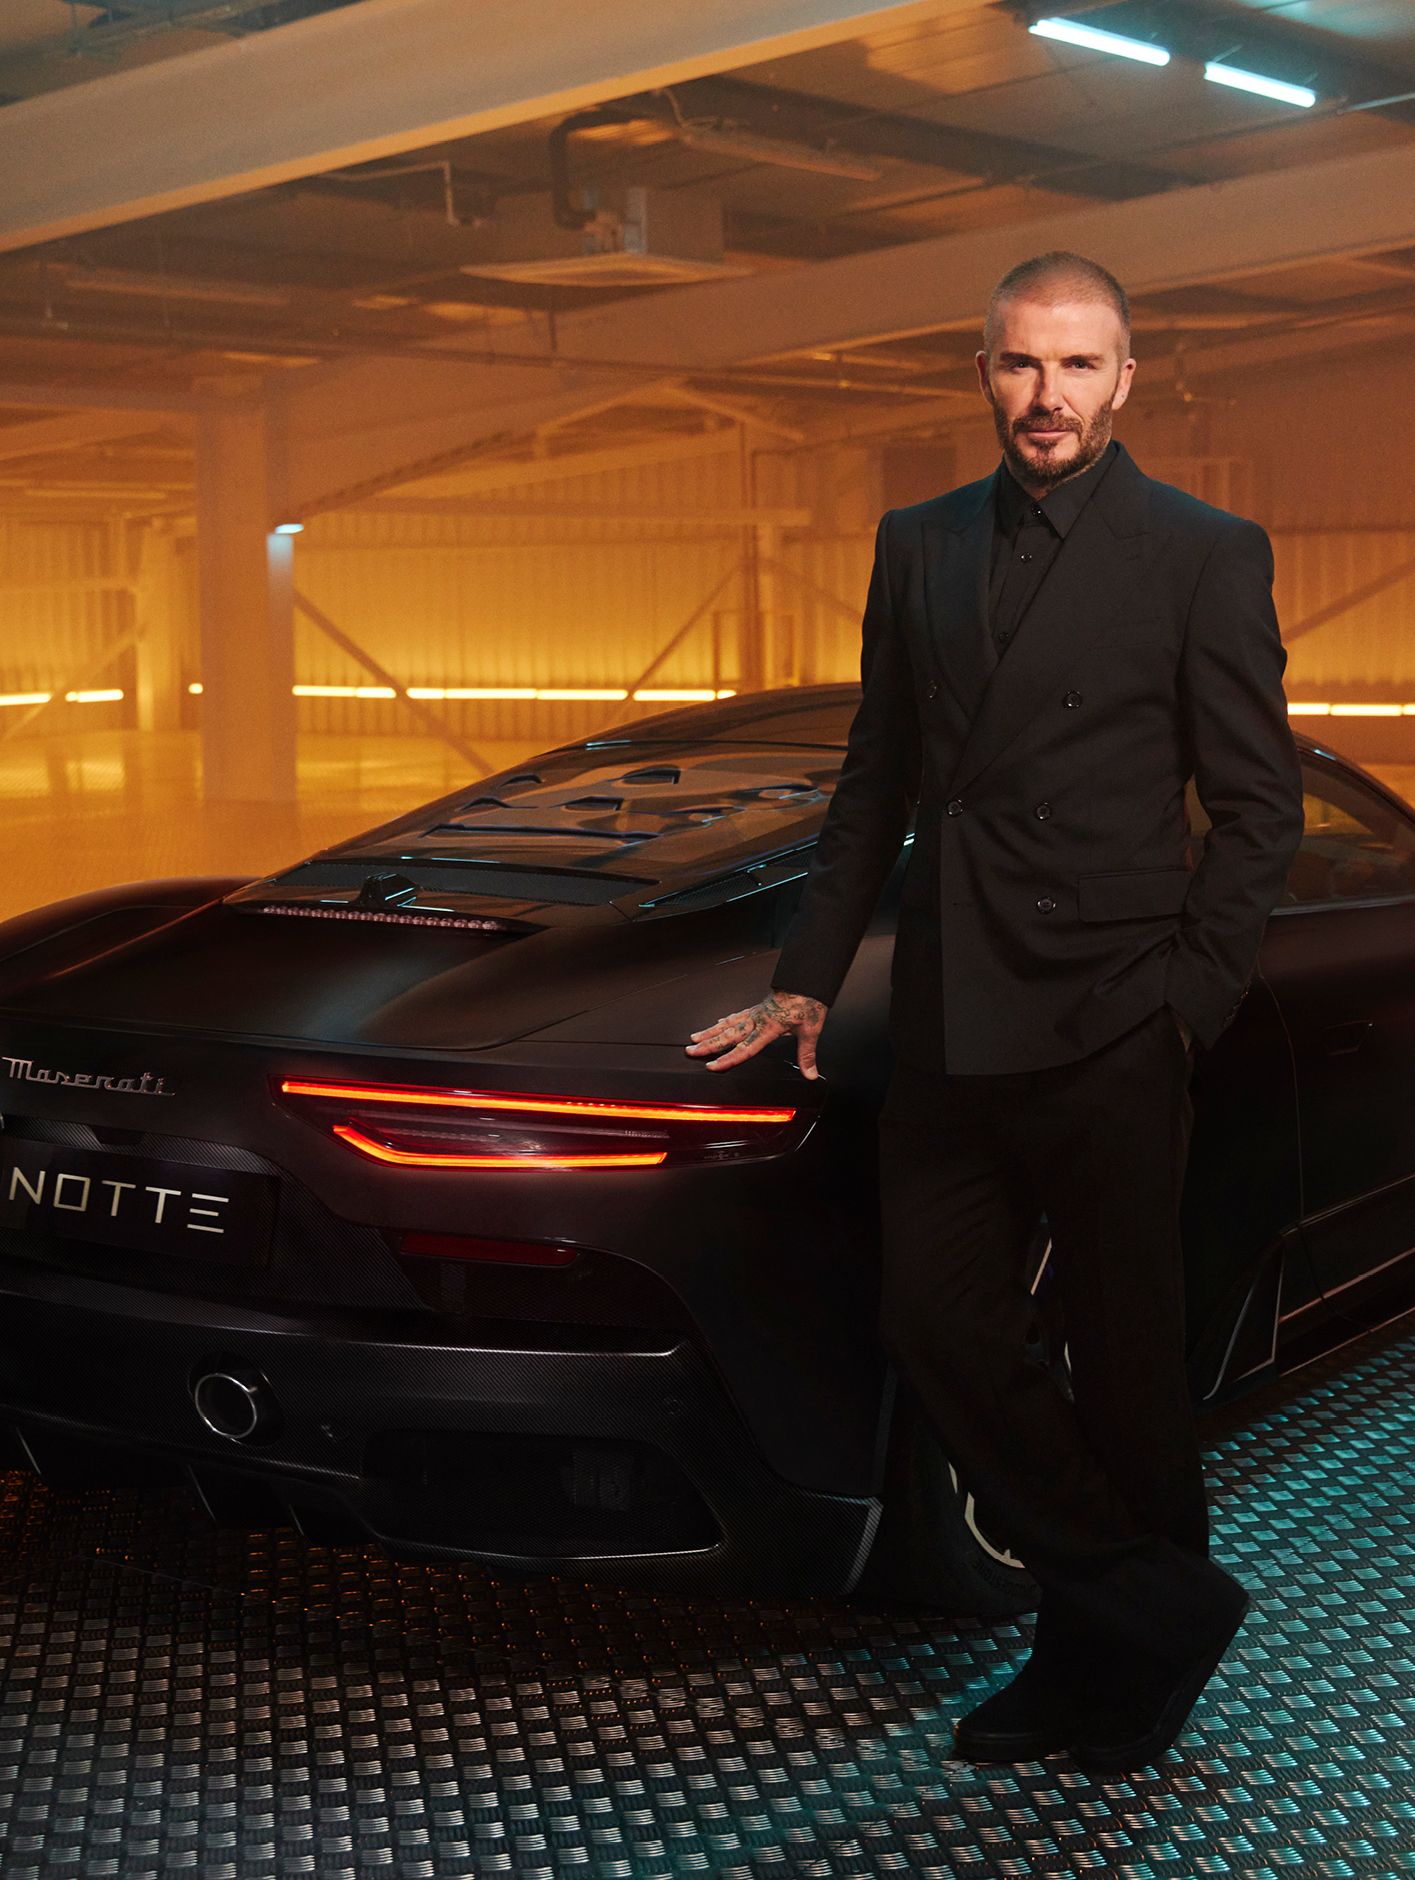 David Beckham, a legend from another sport, has starred in the marketing campaign for the MC20 Notte